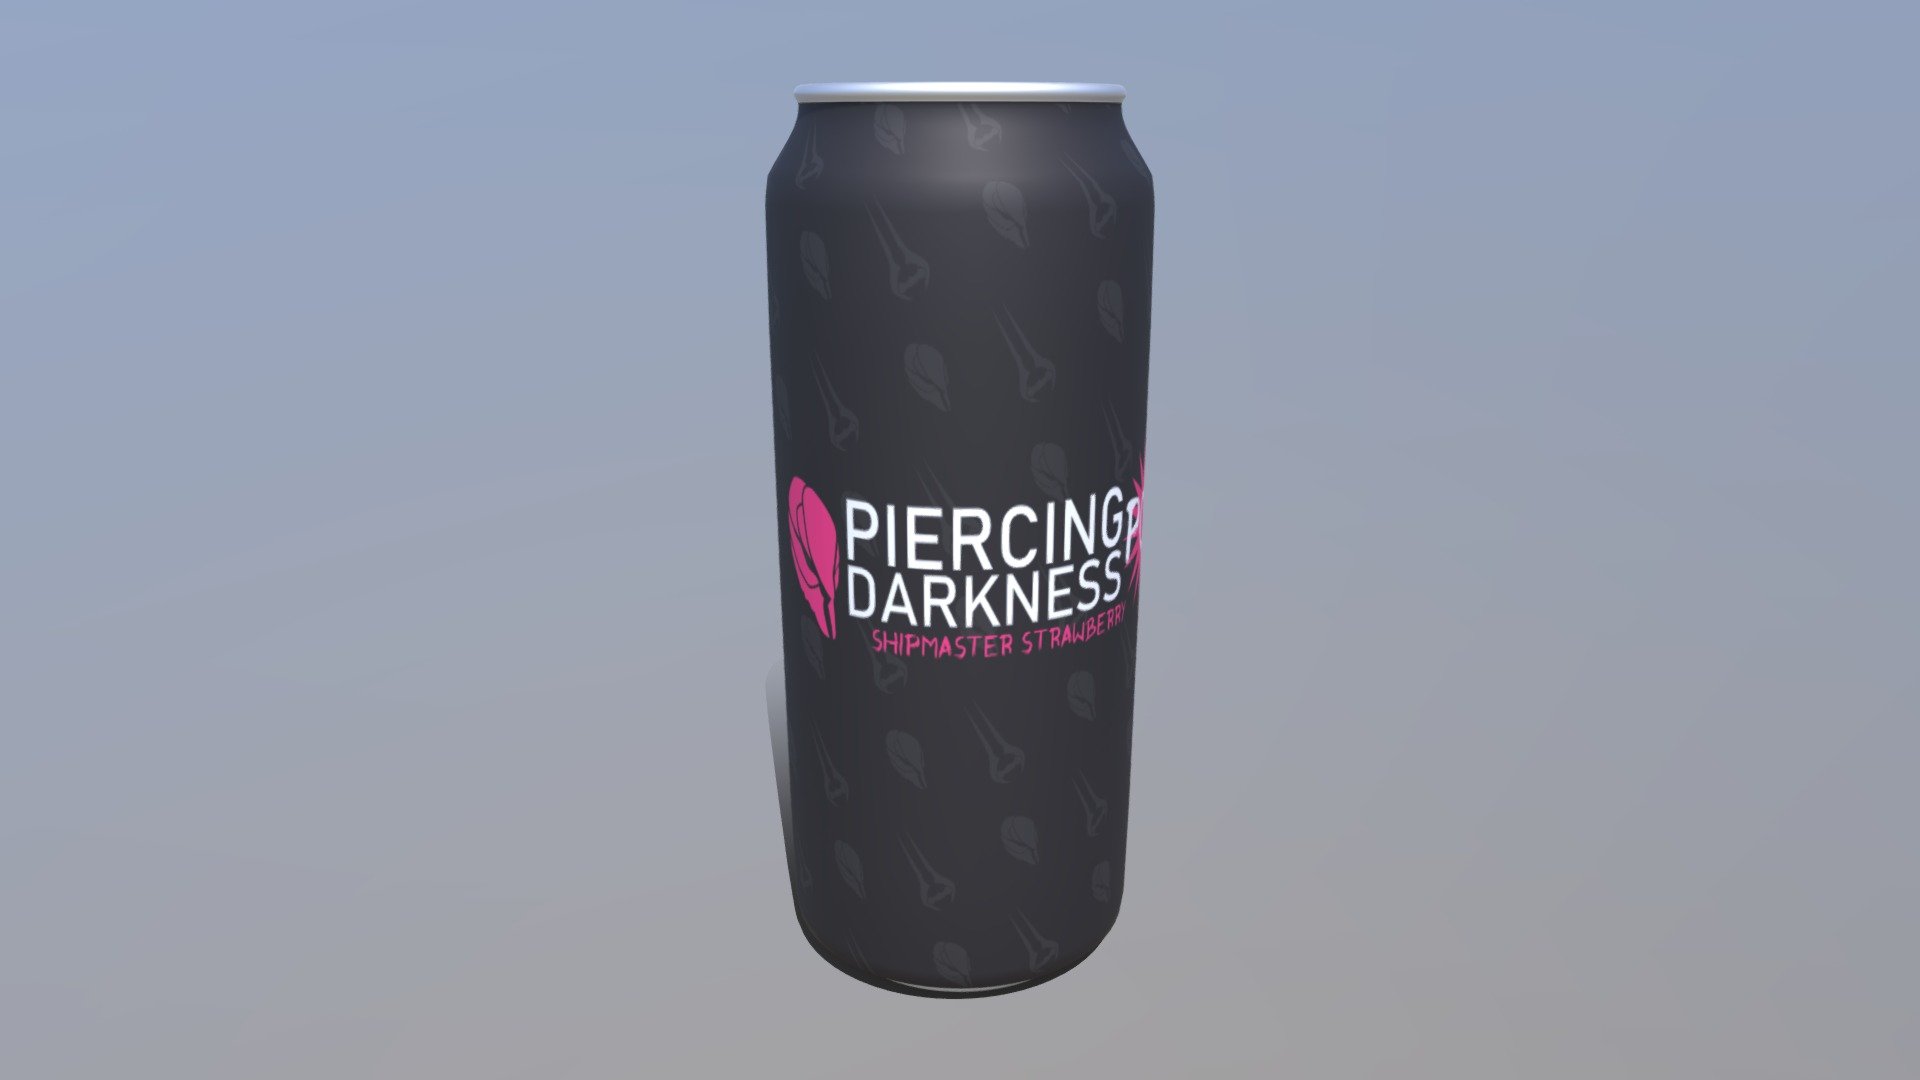 energy drink of my own, fake, brand: no rights reserved

made to mock a friend who happens to be a scalie

fun stuff - Piercing Darkness POP! - 3D model by Devon (@nicholi.duncan) 3d model